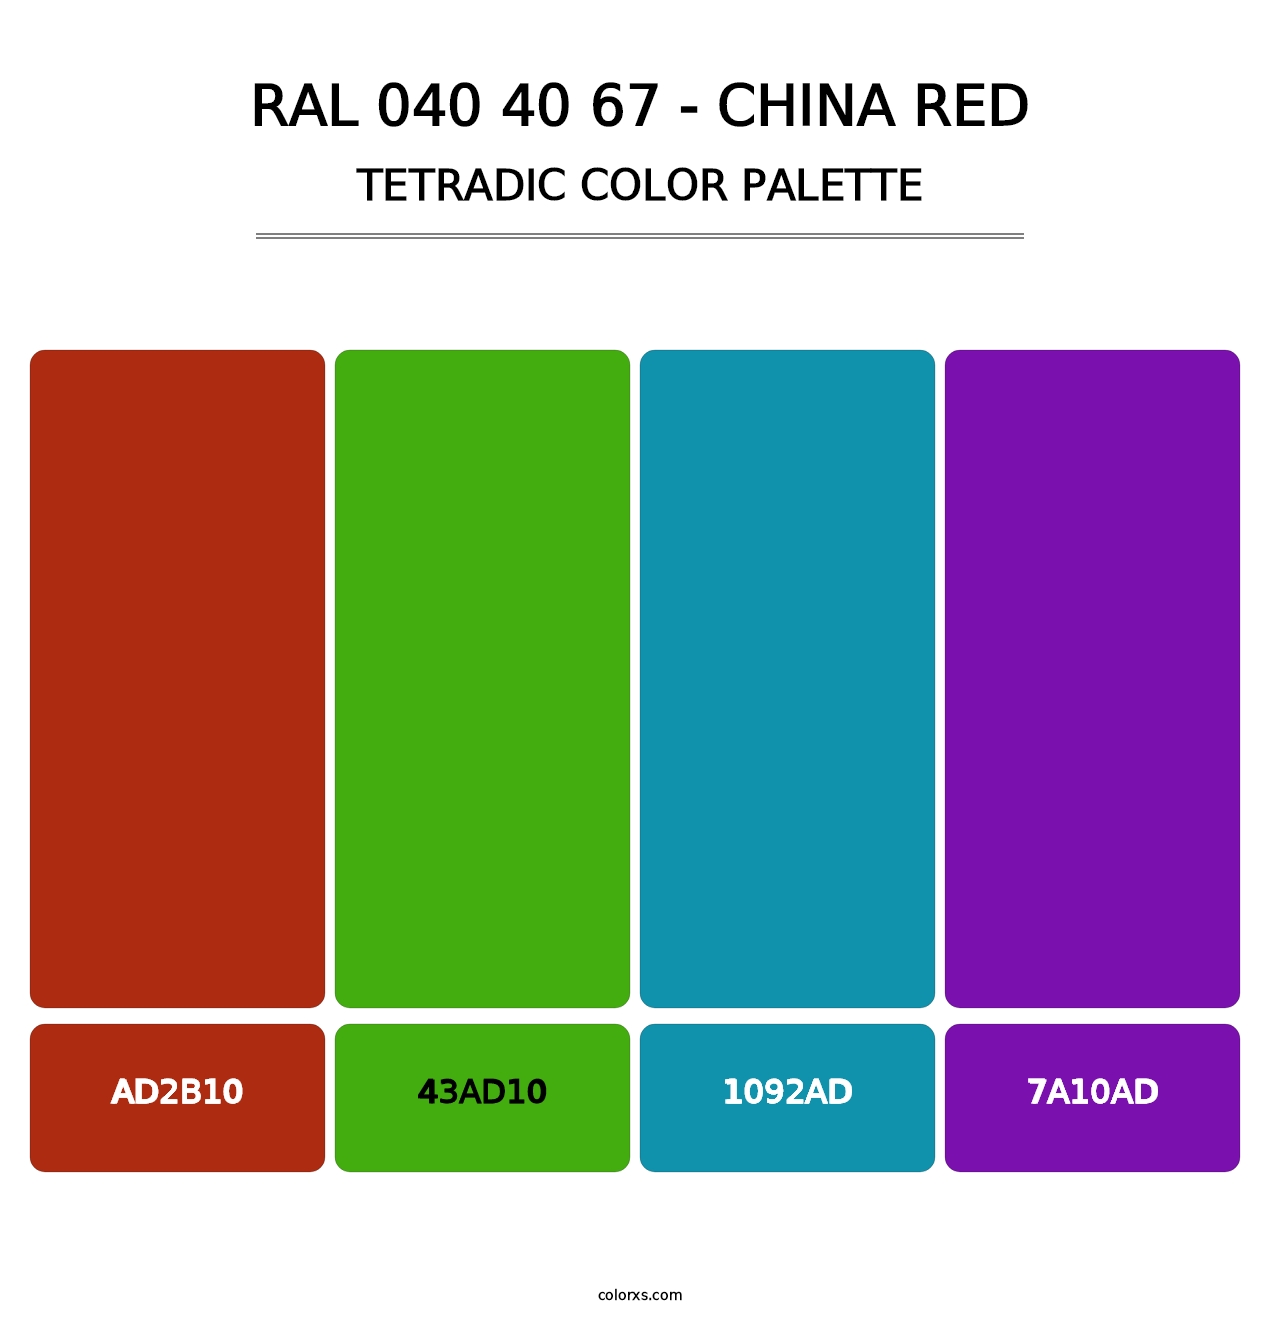 RAL 040 40 67 - China Red - Tetradic Color Palette